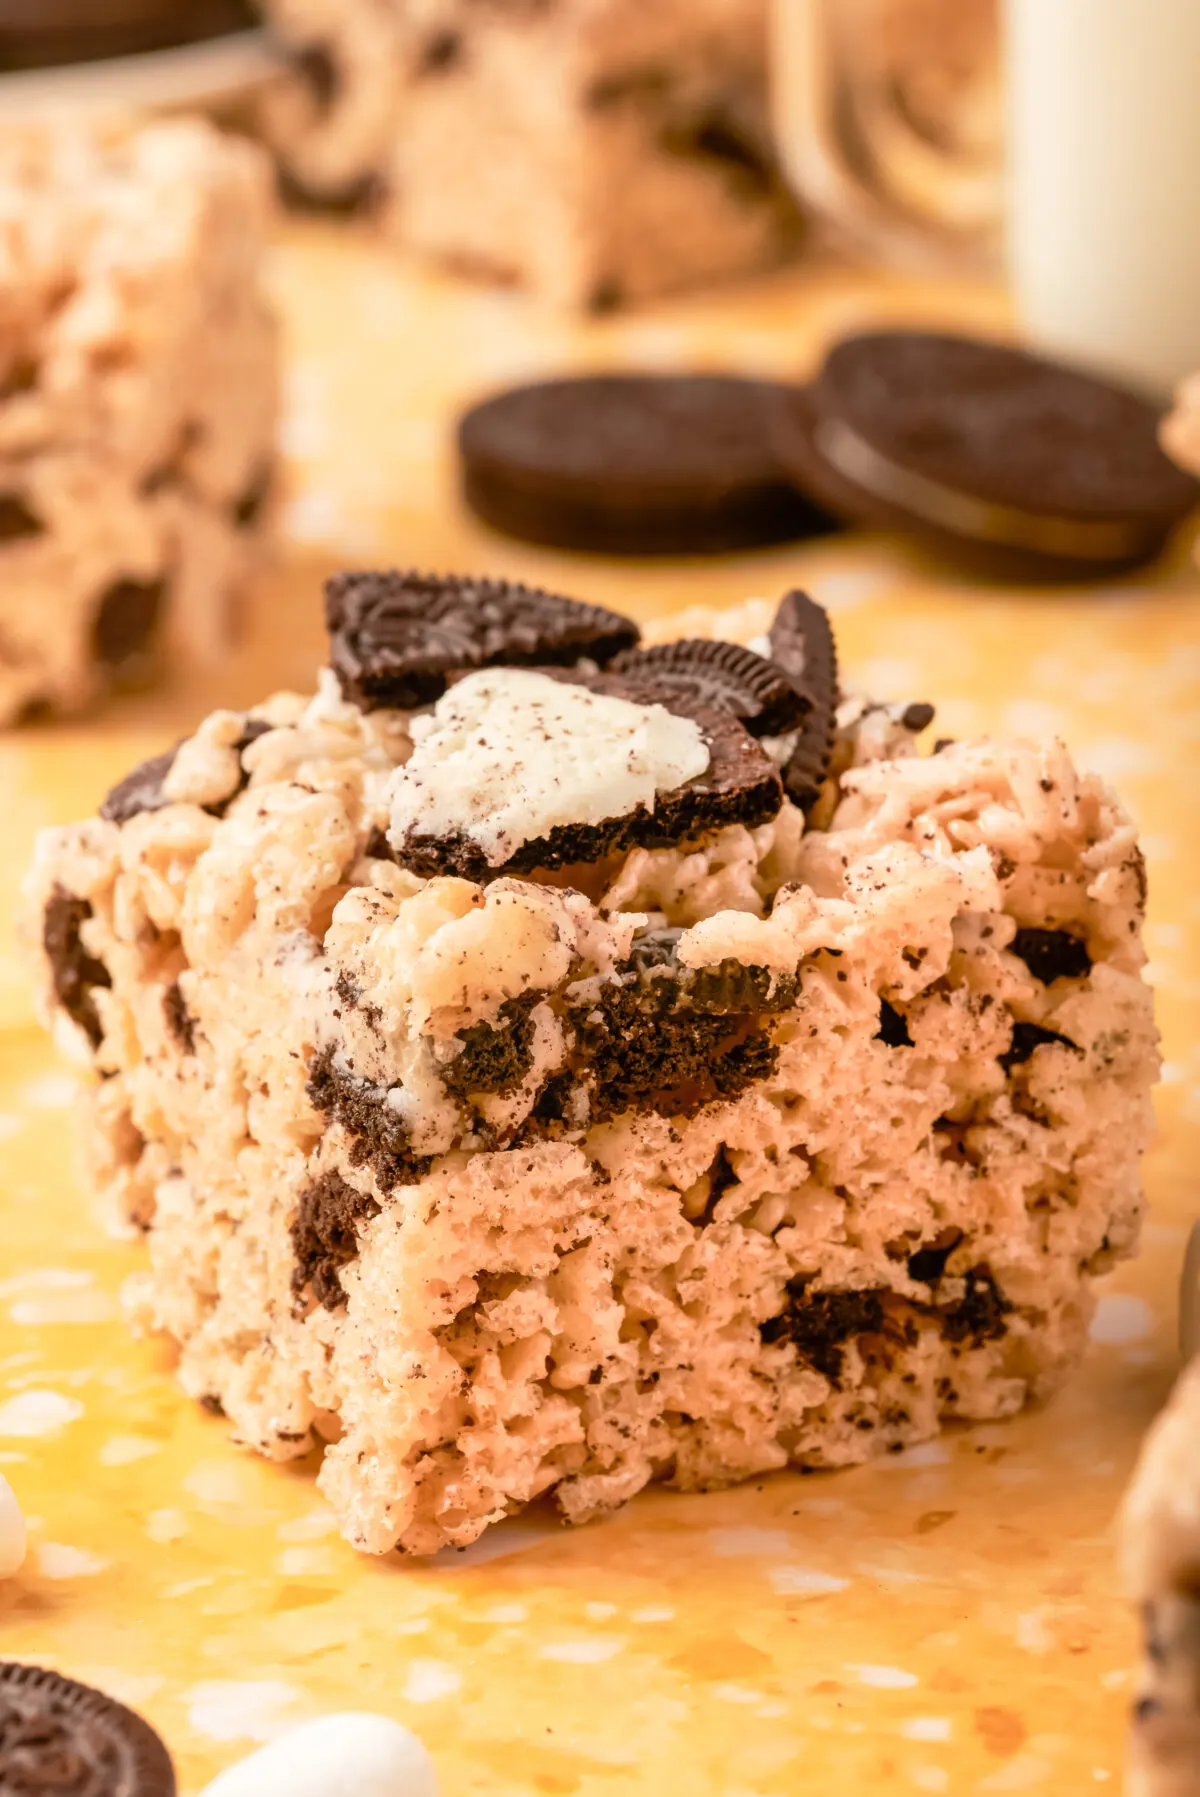 A delicious dessert recipe that the whole family will love. These easy to make Oreo Rice Krispie Treats are sure to please!